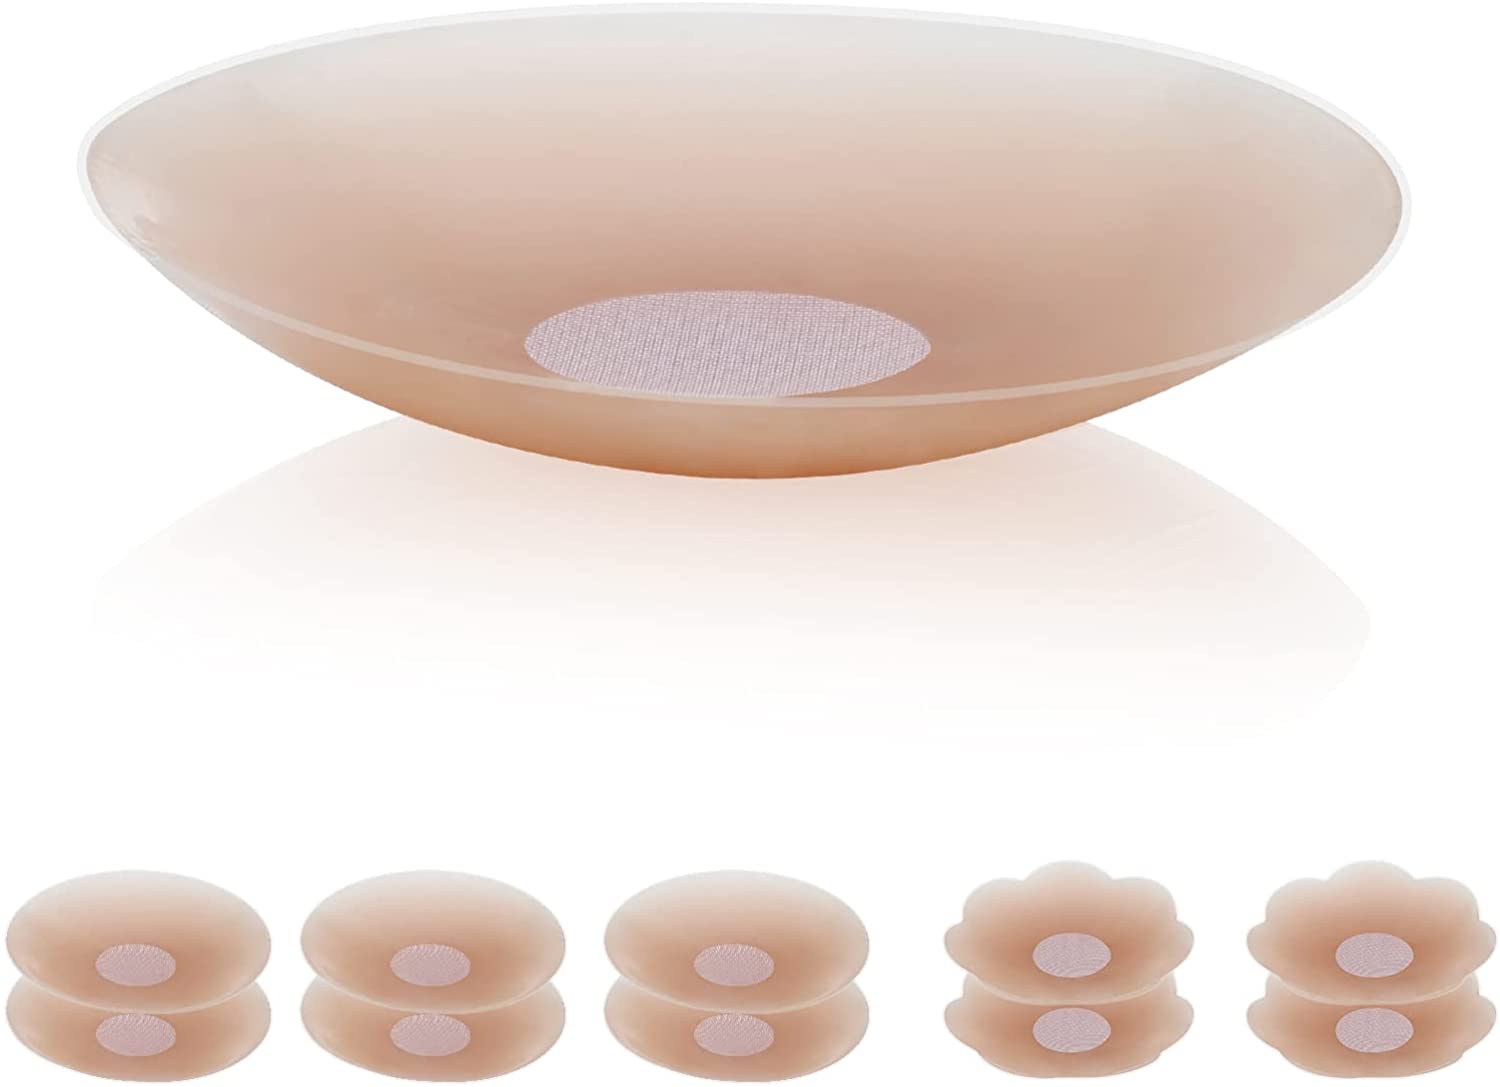 VOCH GALA Nipple Cover, 2 Pairs, Non Adhesive Nipple Pasties, Thin Edges,  Natural Look, 3.3-inch for A-C, Sensitive Skin